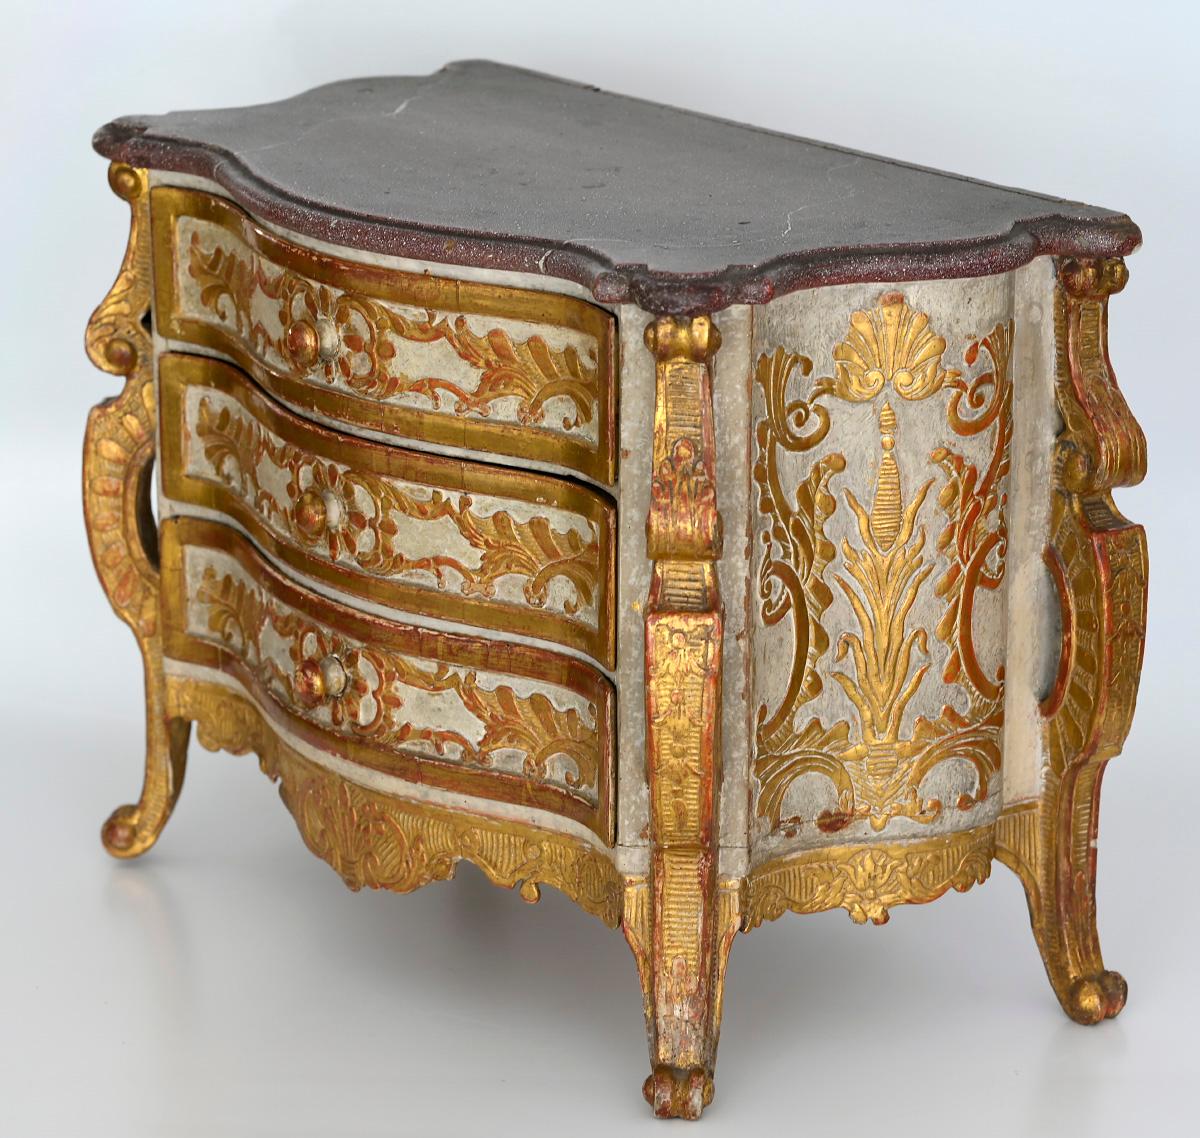 Special and rare model commode Munich circa 1740, based on a design by Francoise de Cucillies,
Executed by the Munich court workshop Jacob Gerstens
original frame, gilding and condition
The sides and the front are curved and cambered. Very